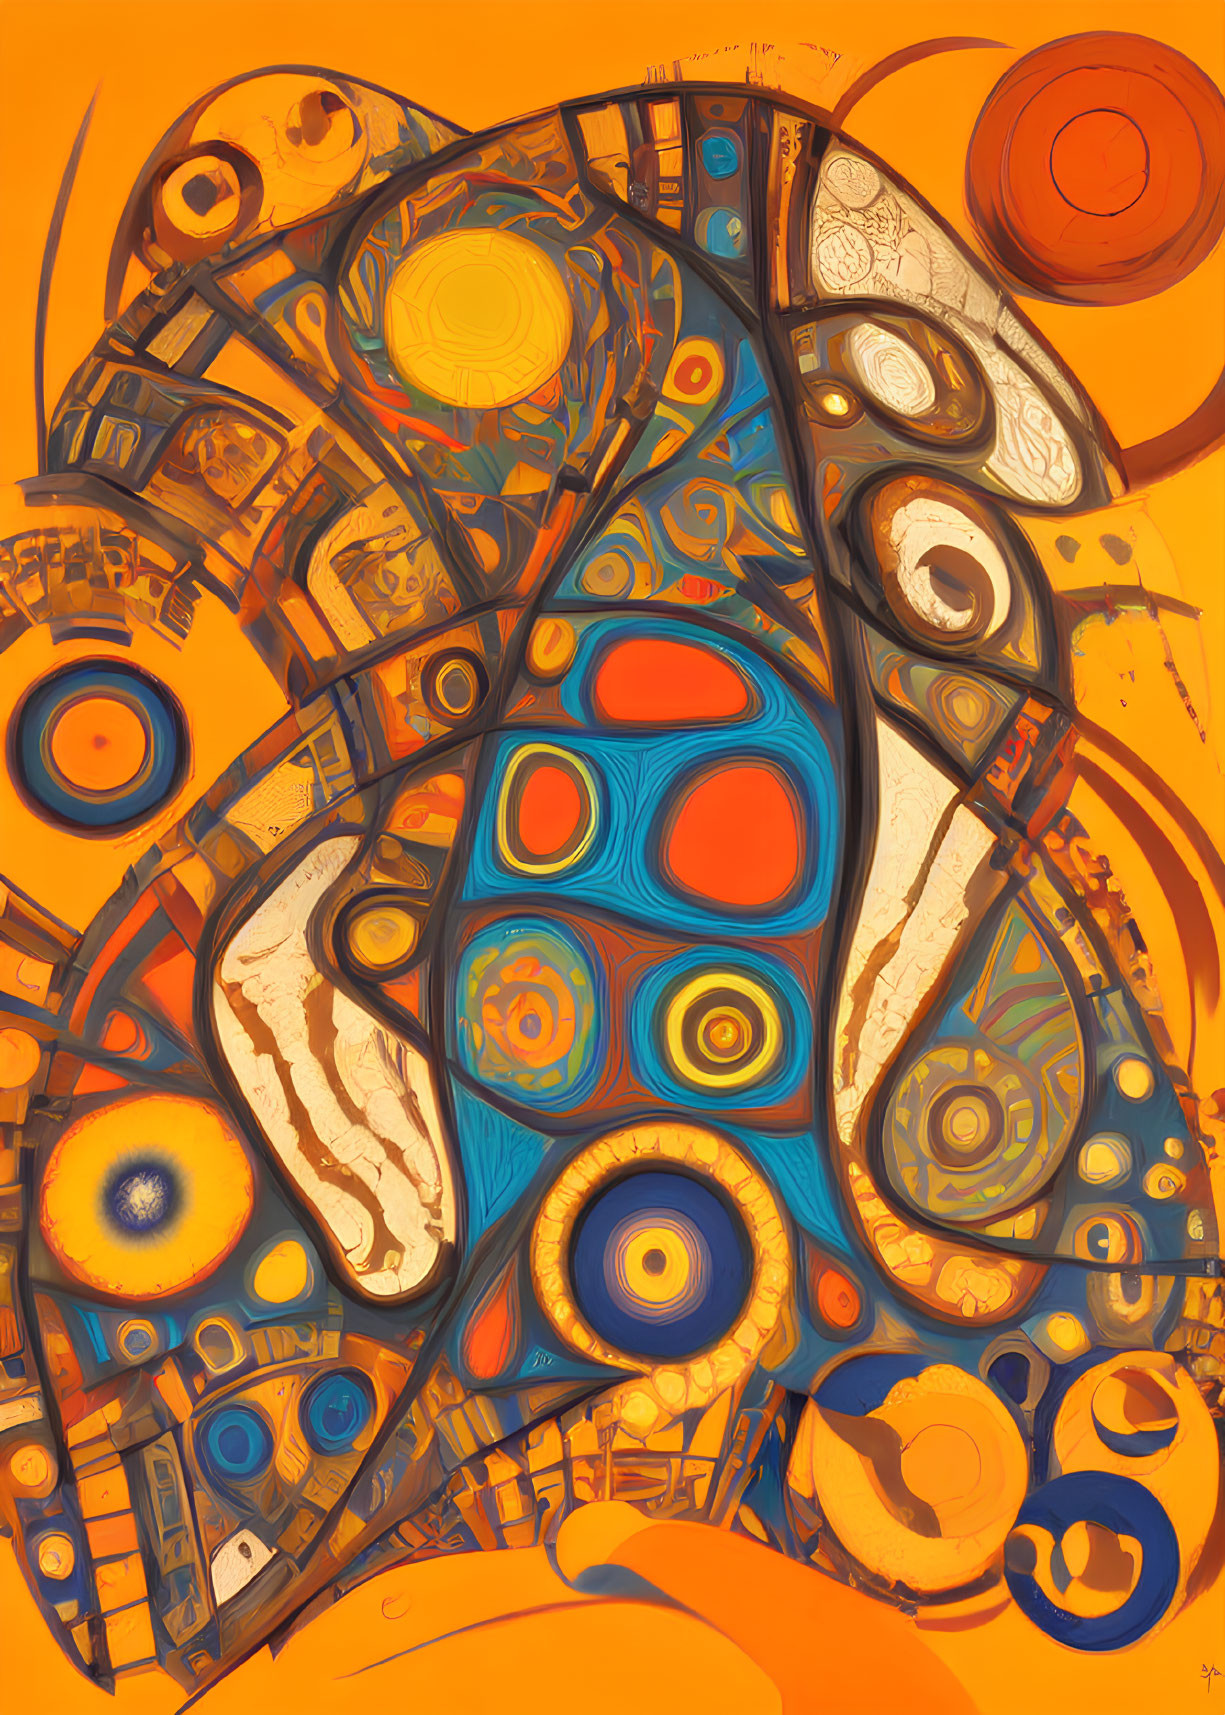 Vibrant Orange and Blue Abstract Art with Circular and Mechanical Elements